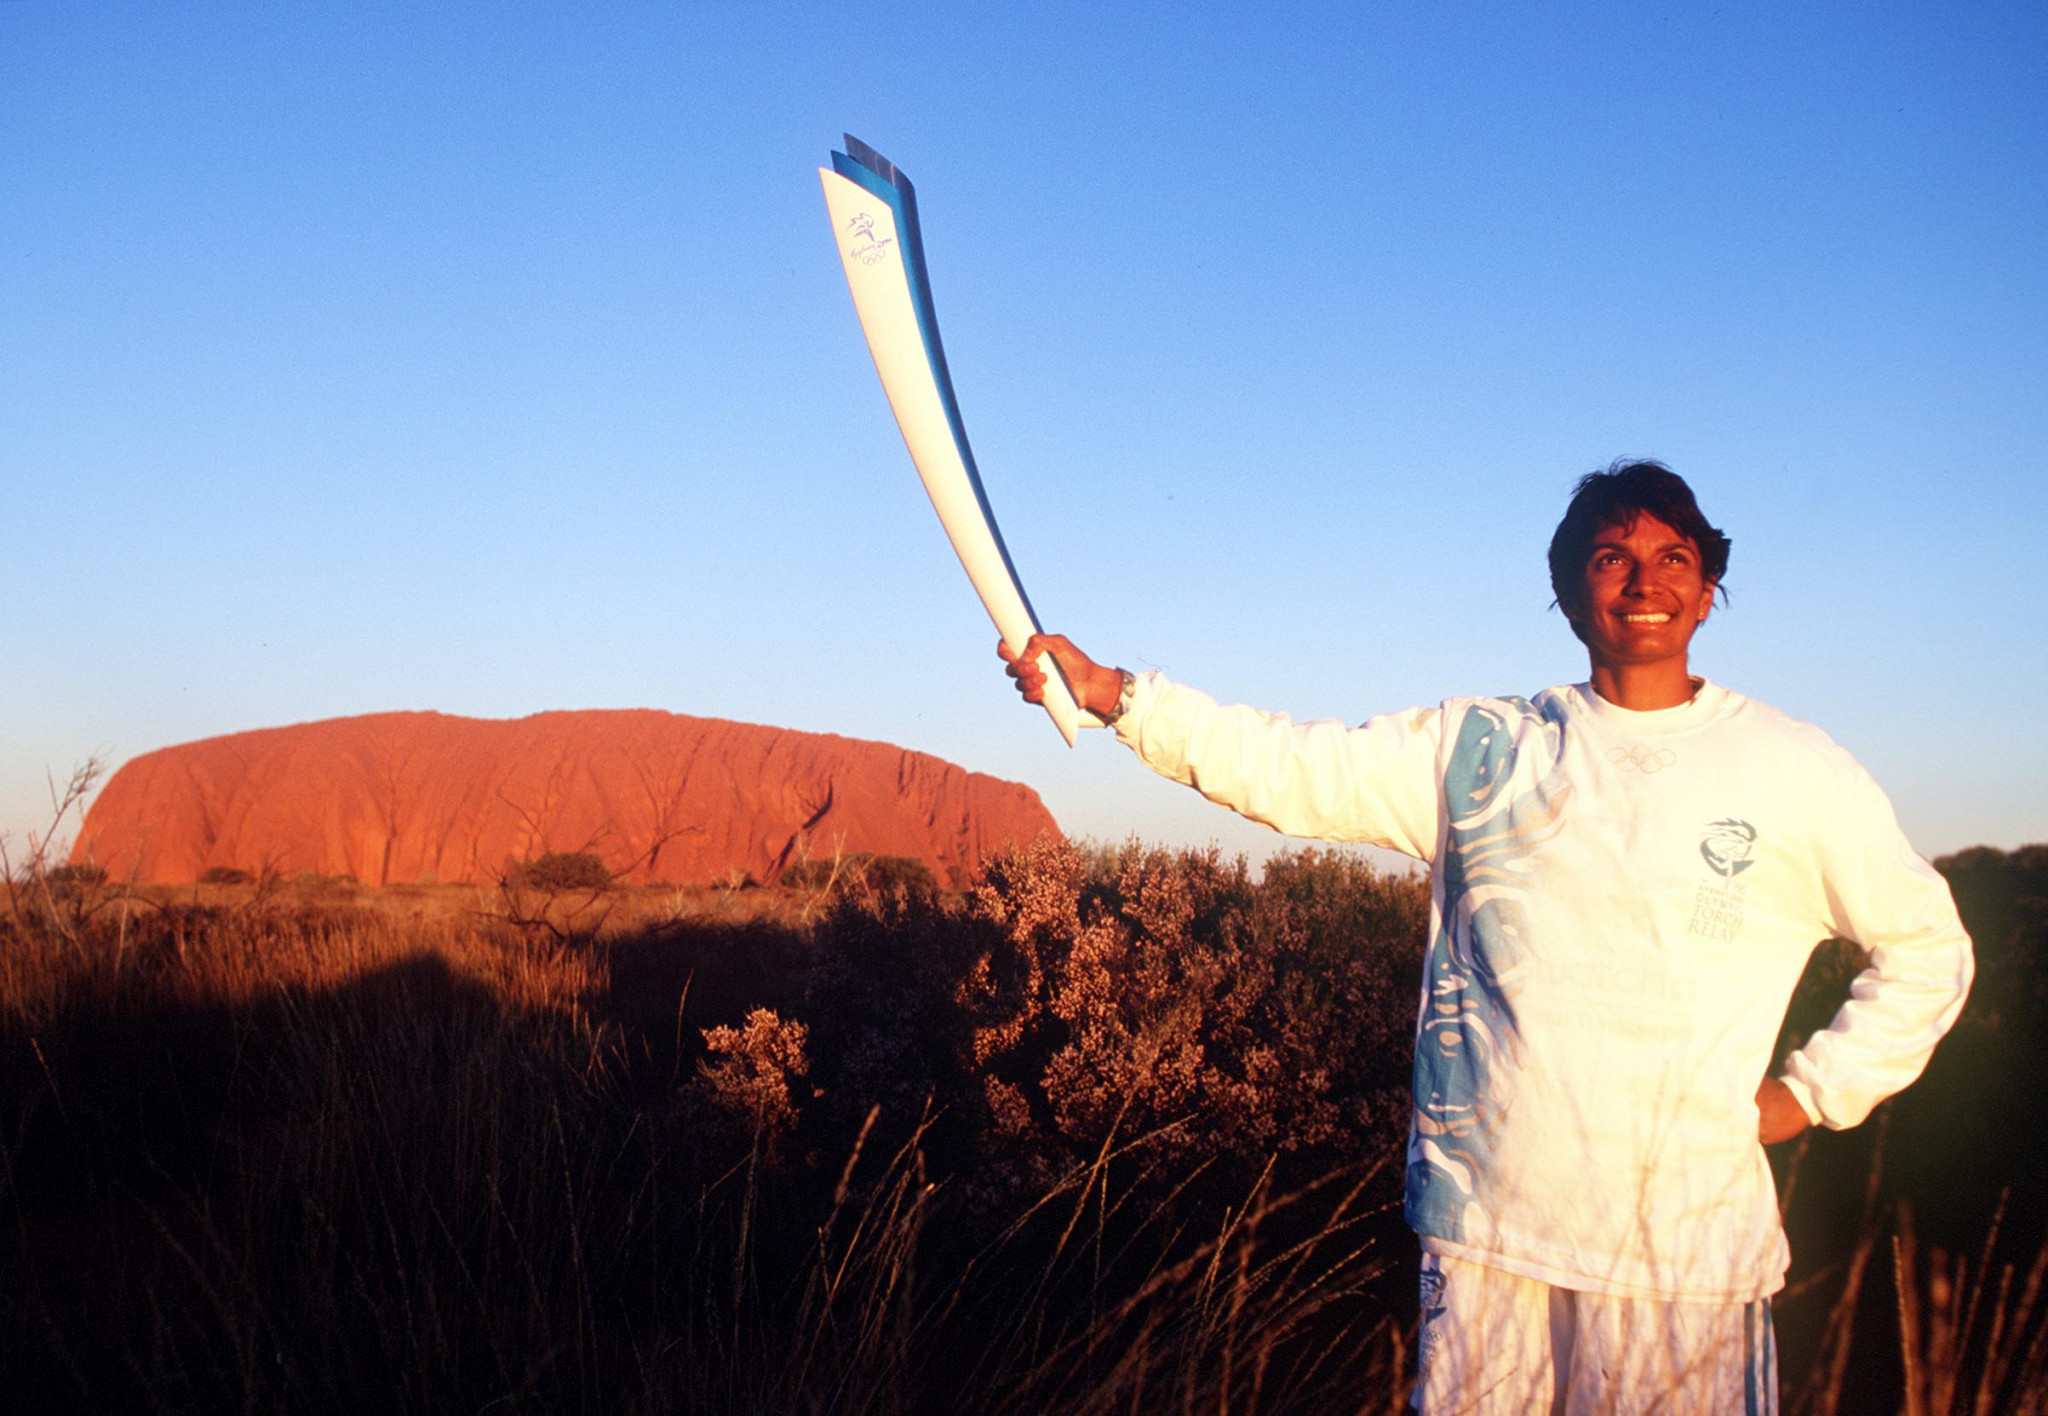 Nova Peris, the first Aboriginal athlete to win an Olympic gold medal as part of the hockey team at Atlanta 1996, was selected as the first bearer when the Torch begun its journey in Australia for Sydney 2000 ©Getty Images